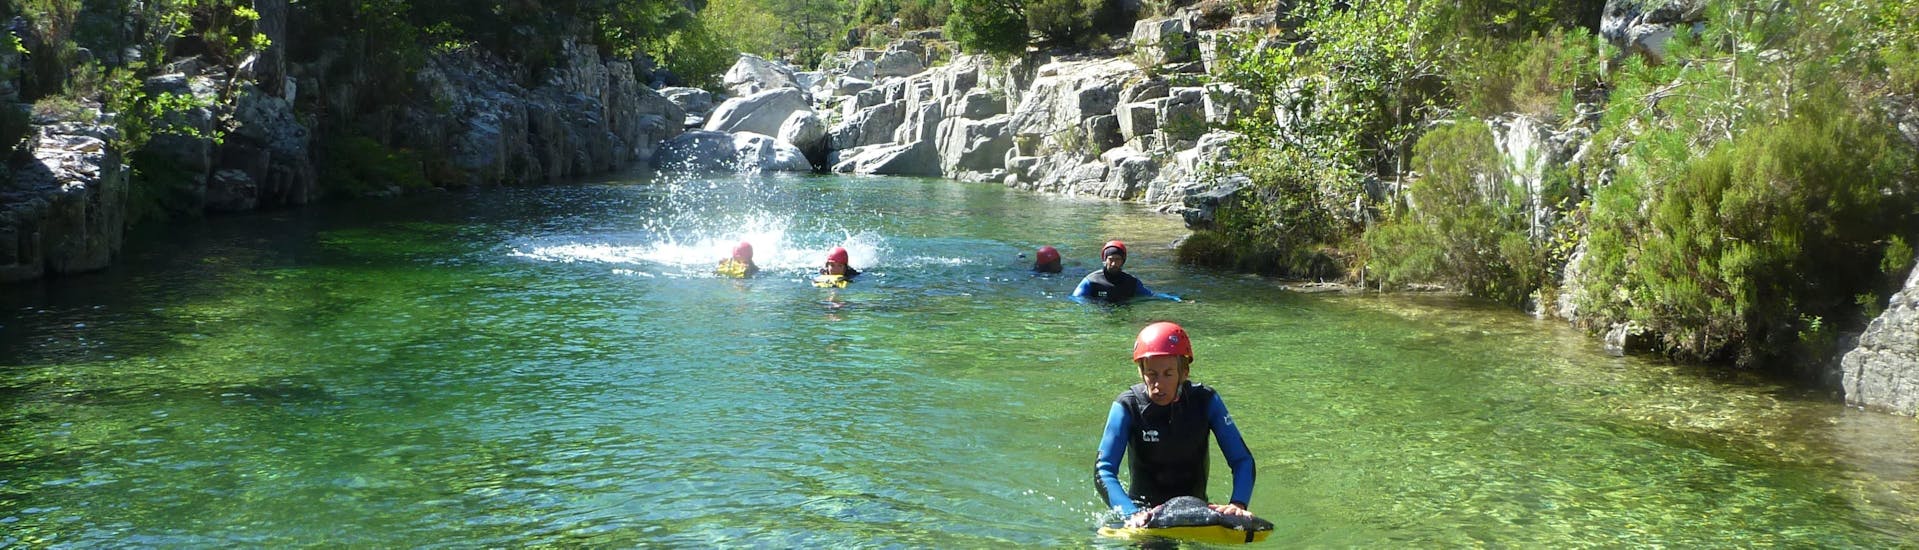 A group is swimming in the canyon du Tavignano during the Canyoning Full day with Canyon Corse.